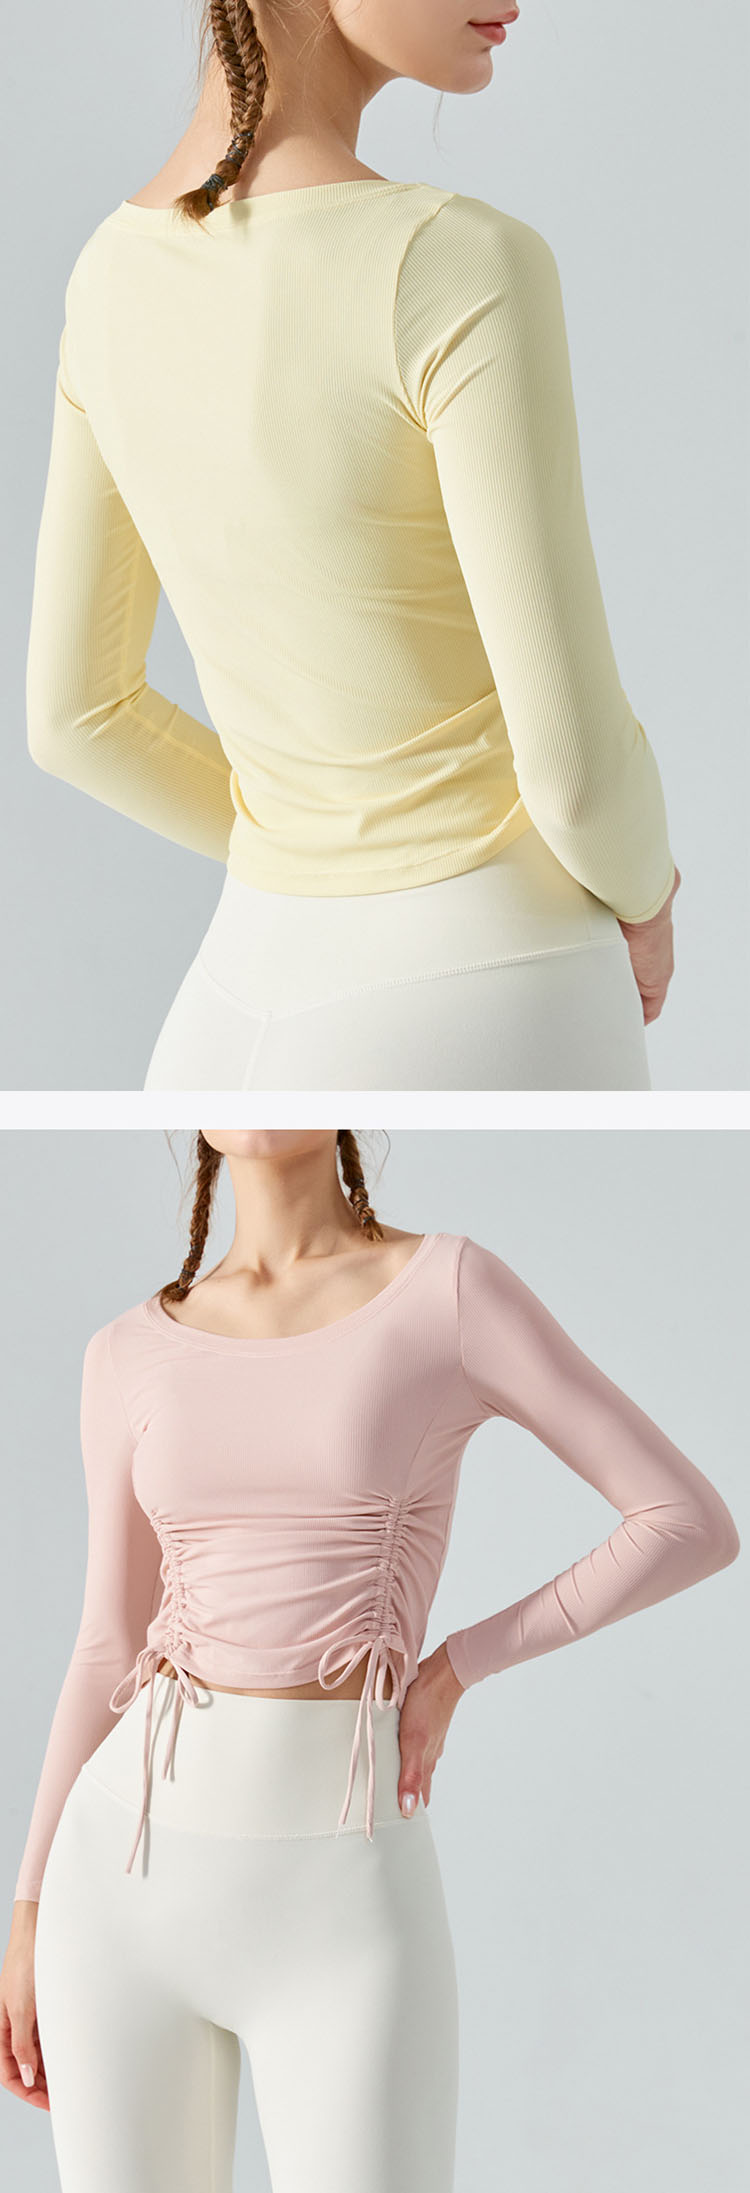 Slim-fit design is adopted, which fits the curve of human body and shows slim figure